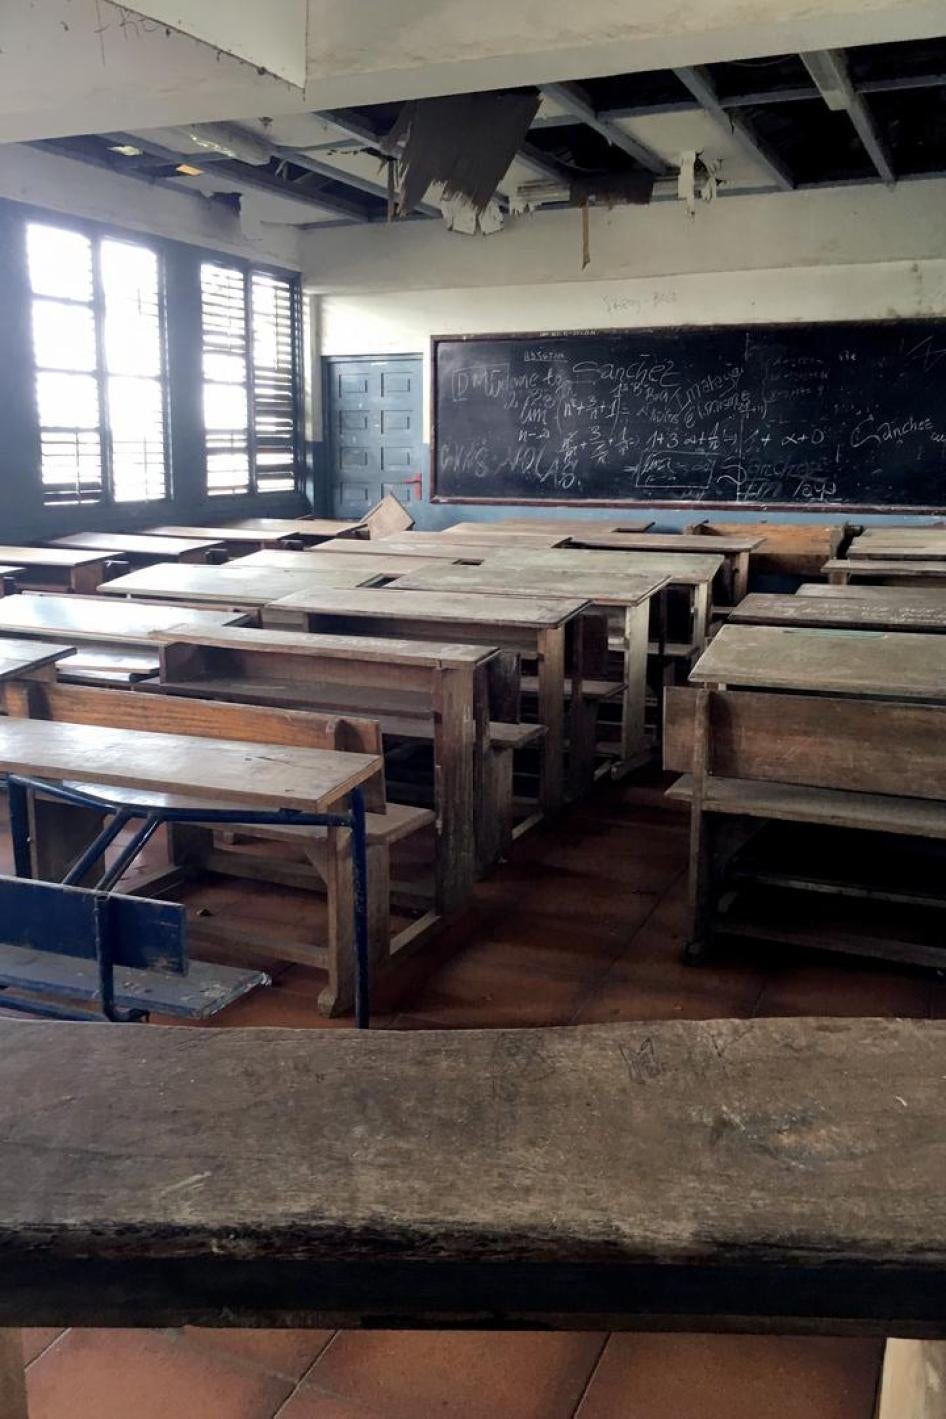 A classroom at an urban public high school. Each classroom held around 40 double benches. Teachers told Human Rights Watch that classes commonly had 70 to 80 students; one said he had 105 students in a class he taught the previous year. 